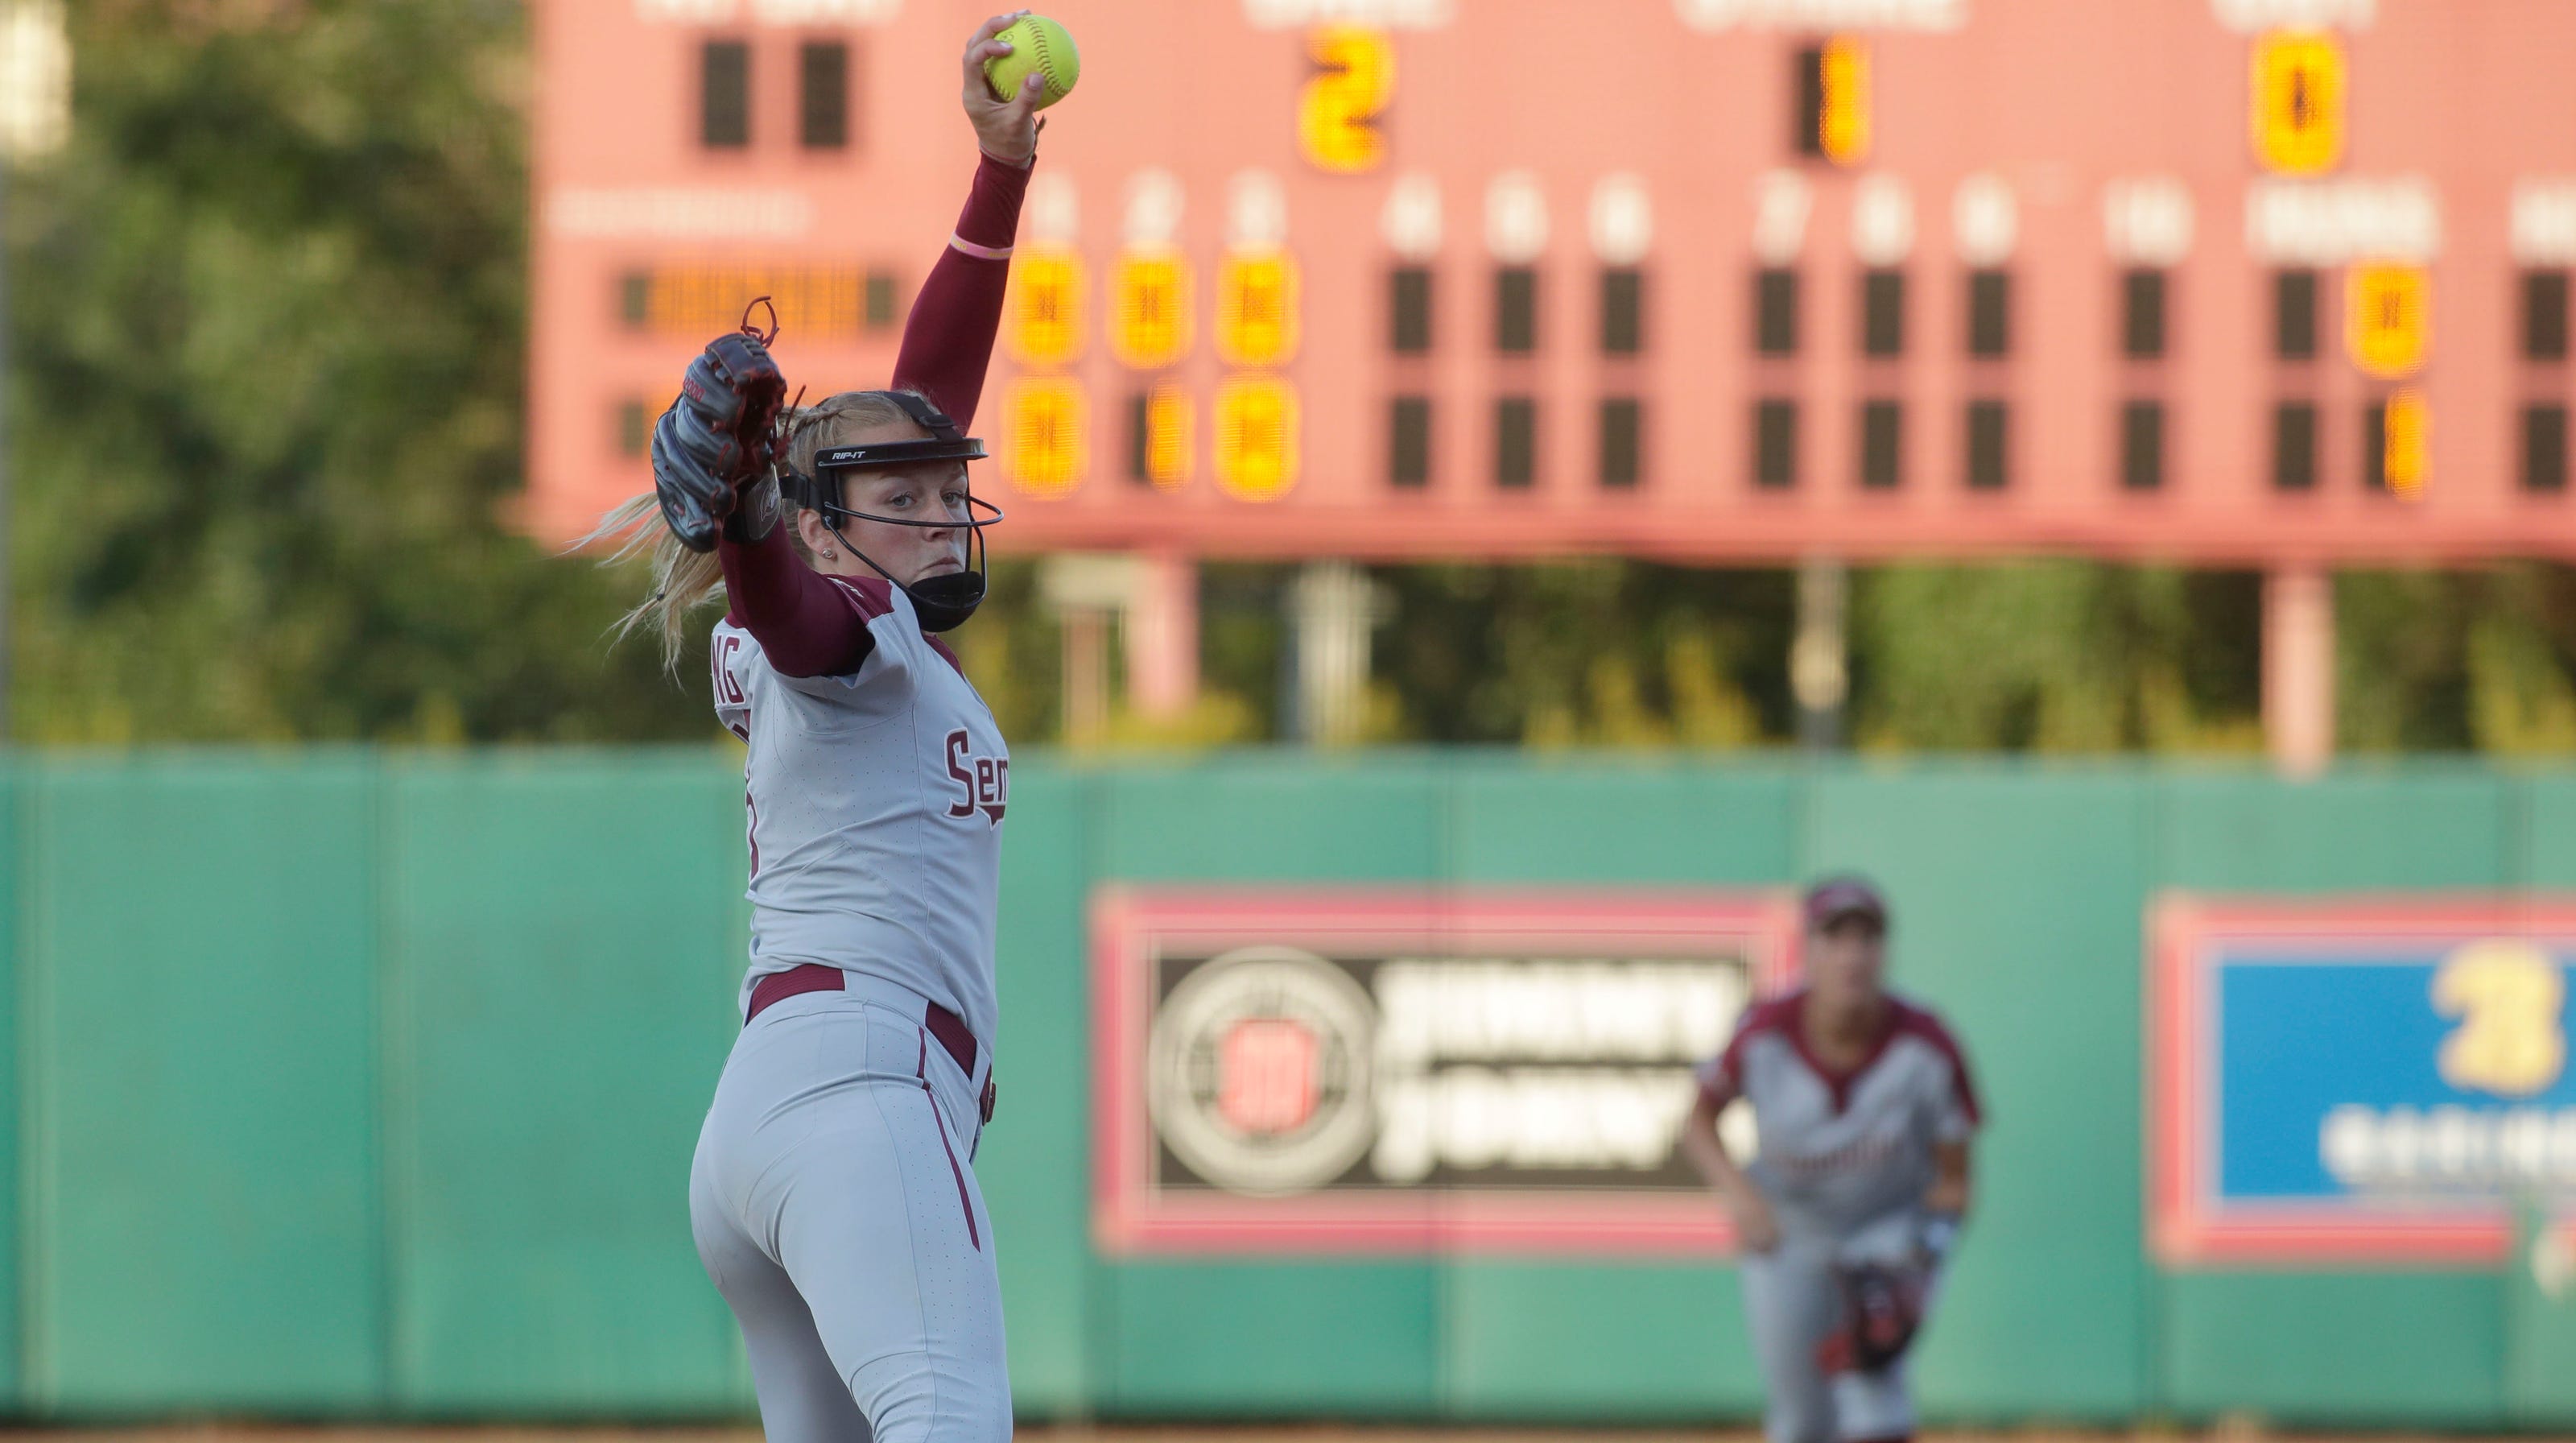 Fsu Outdueled By Oklahoma State In Tallahassee Super Regional Opener